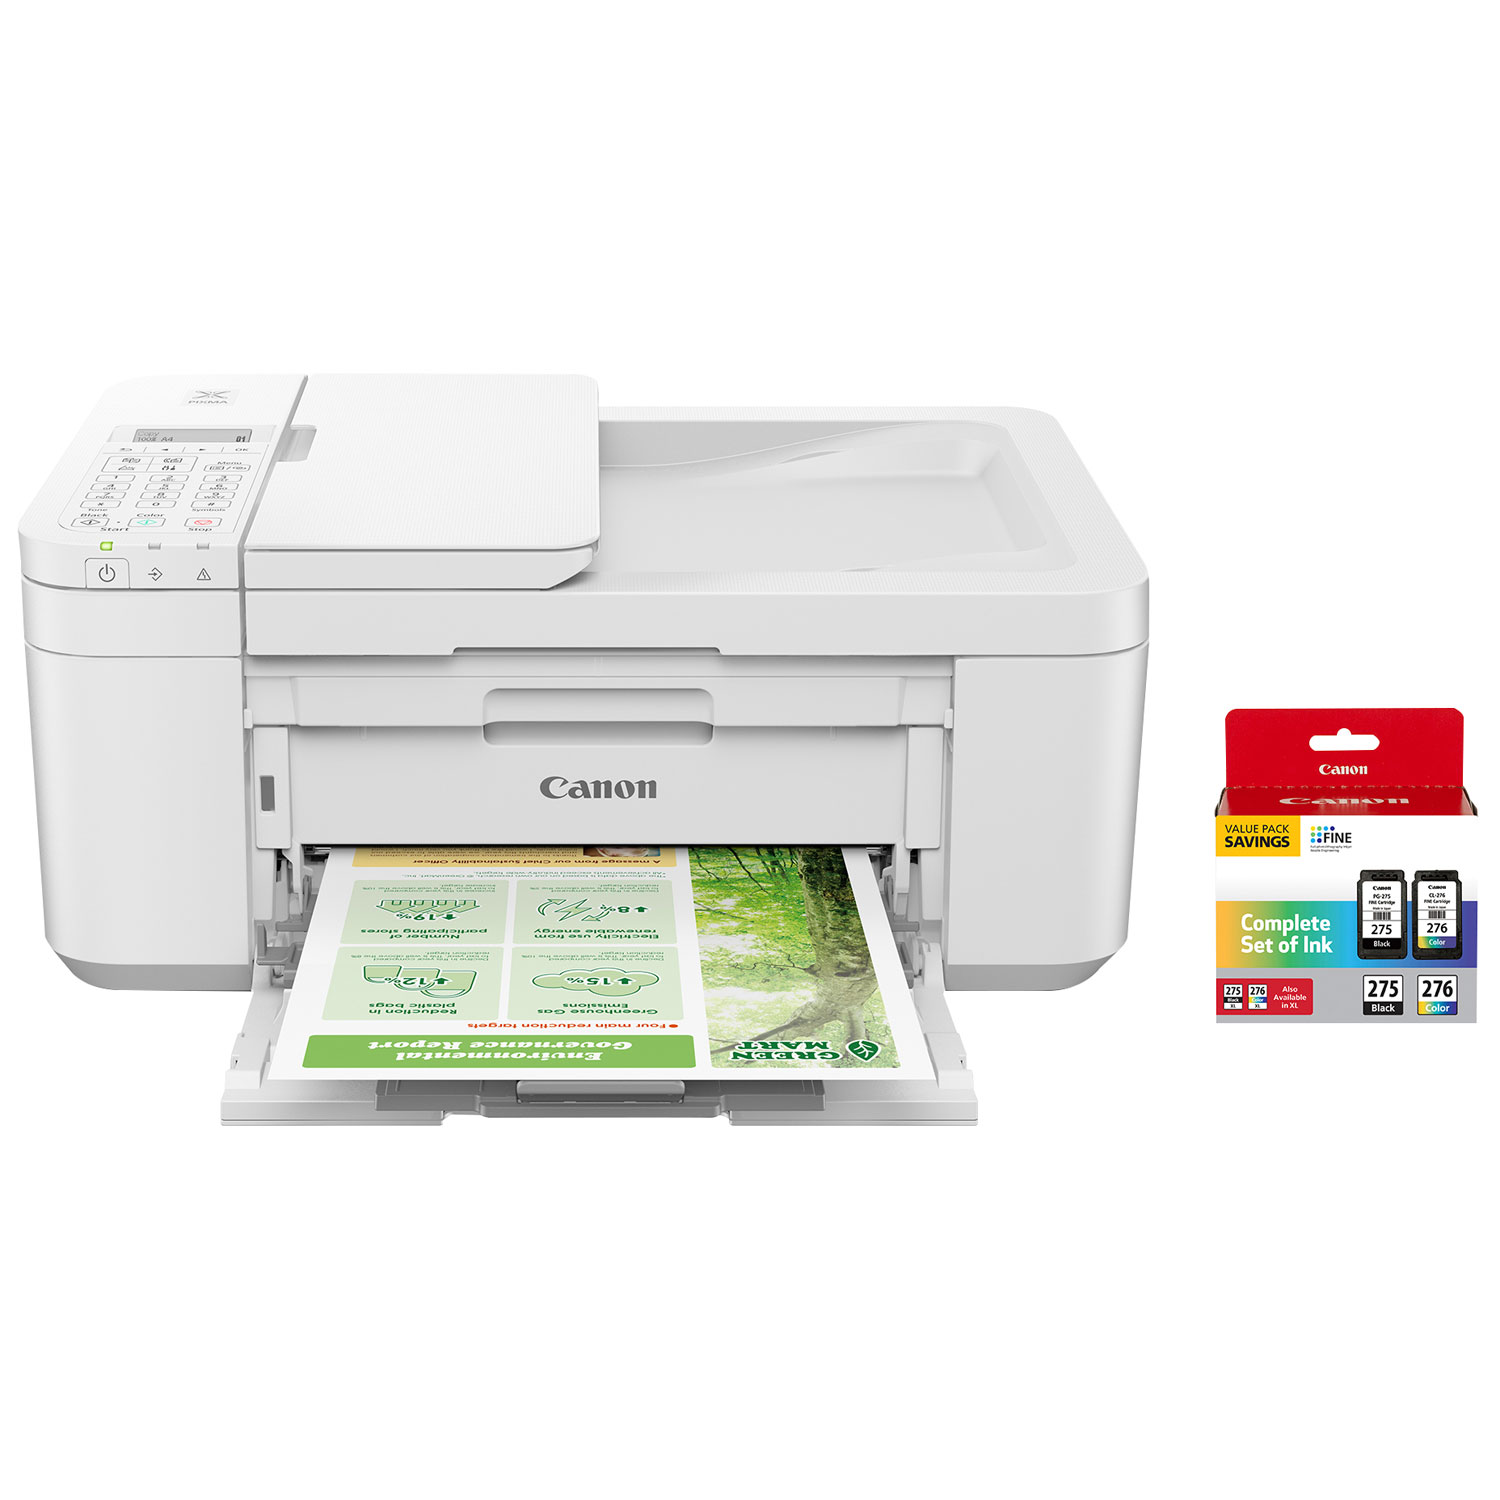 Canon PIXMA TR4720 Wireless All-In-One Inkjet Printer with Black/Colour Ink - 2 Pack - White